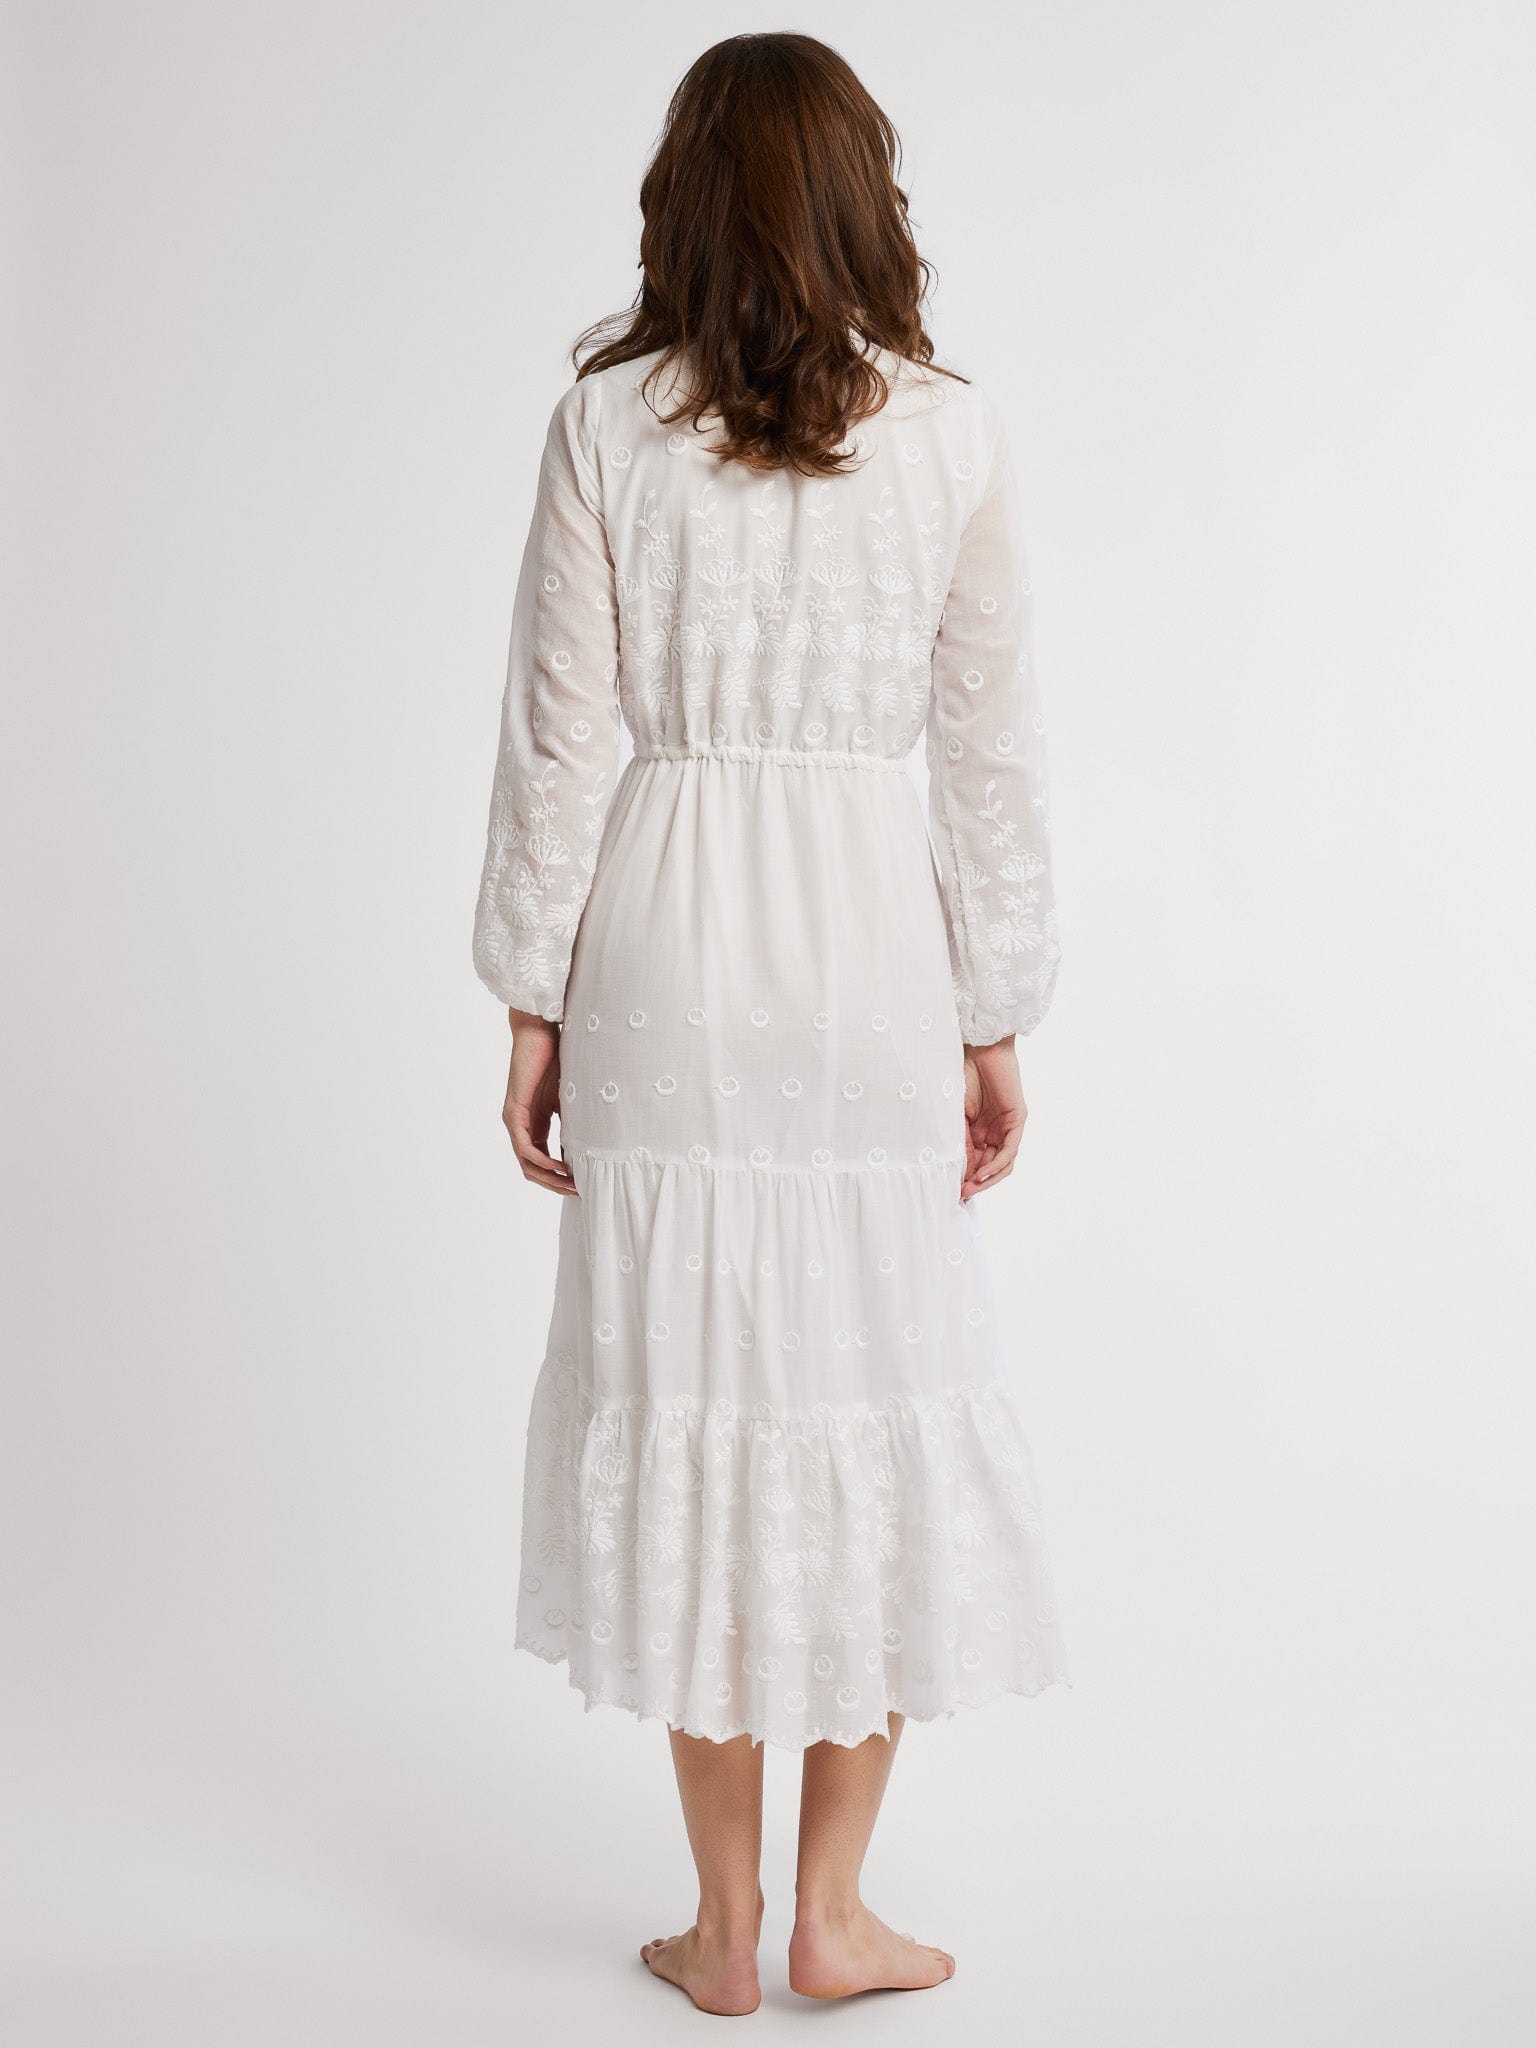 MILLE Clothing Astrid Dress in White Petal Embroidery